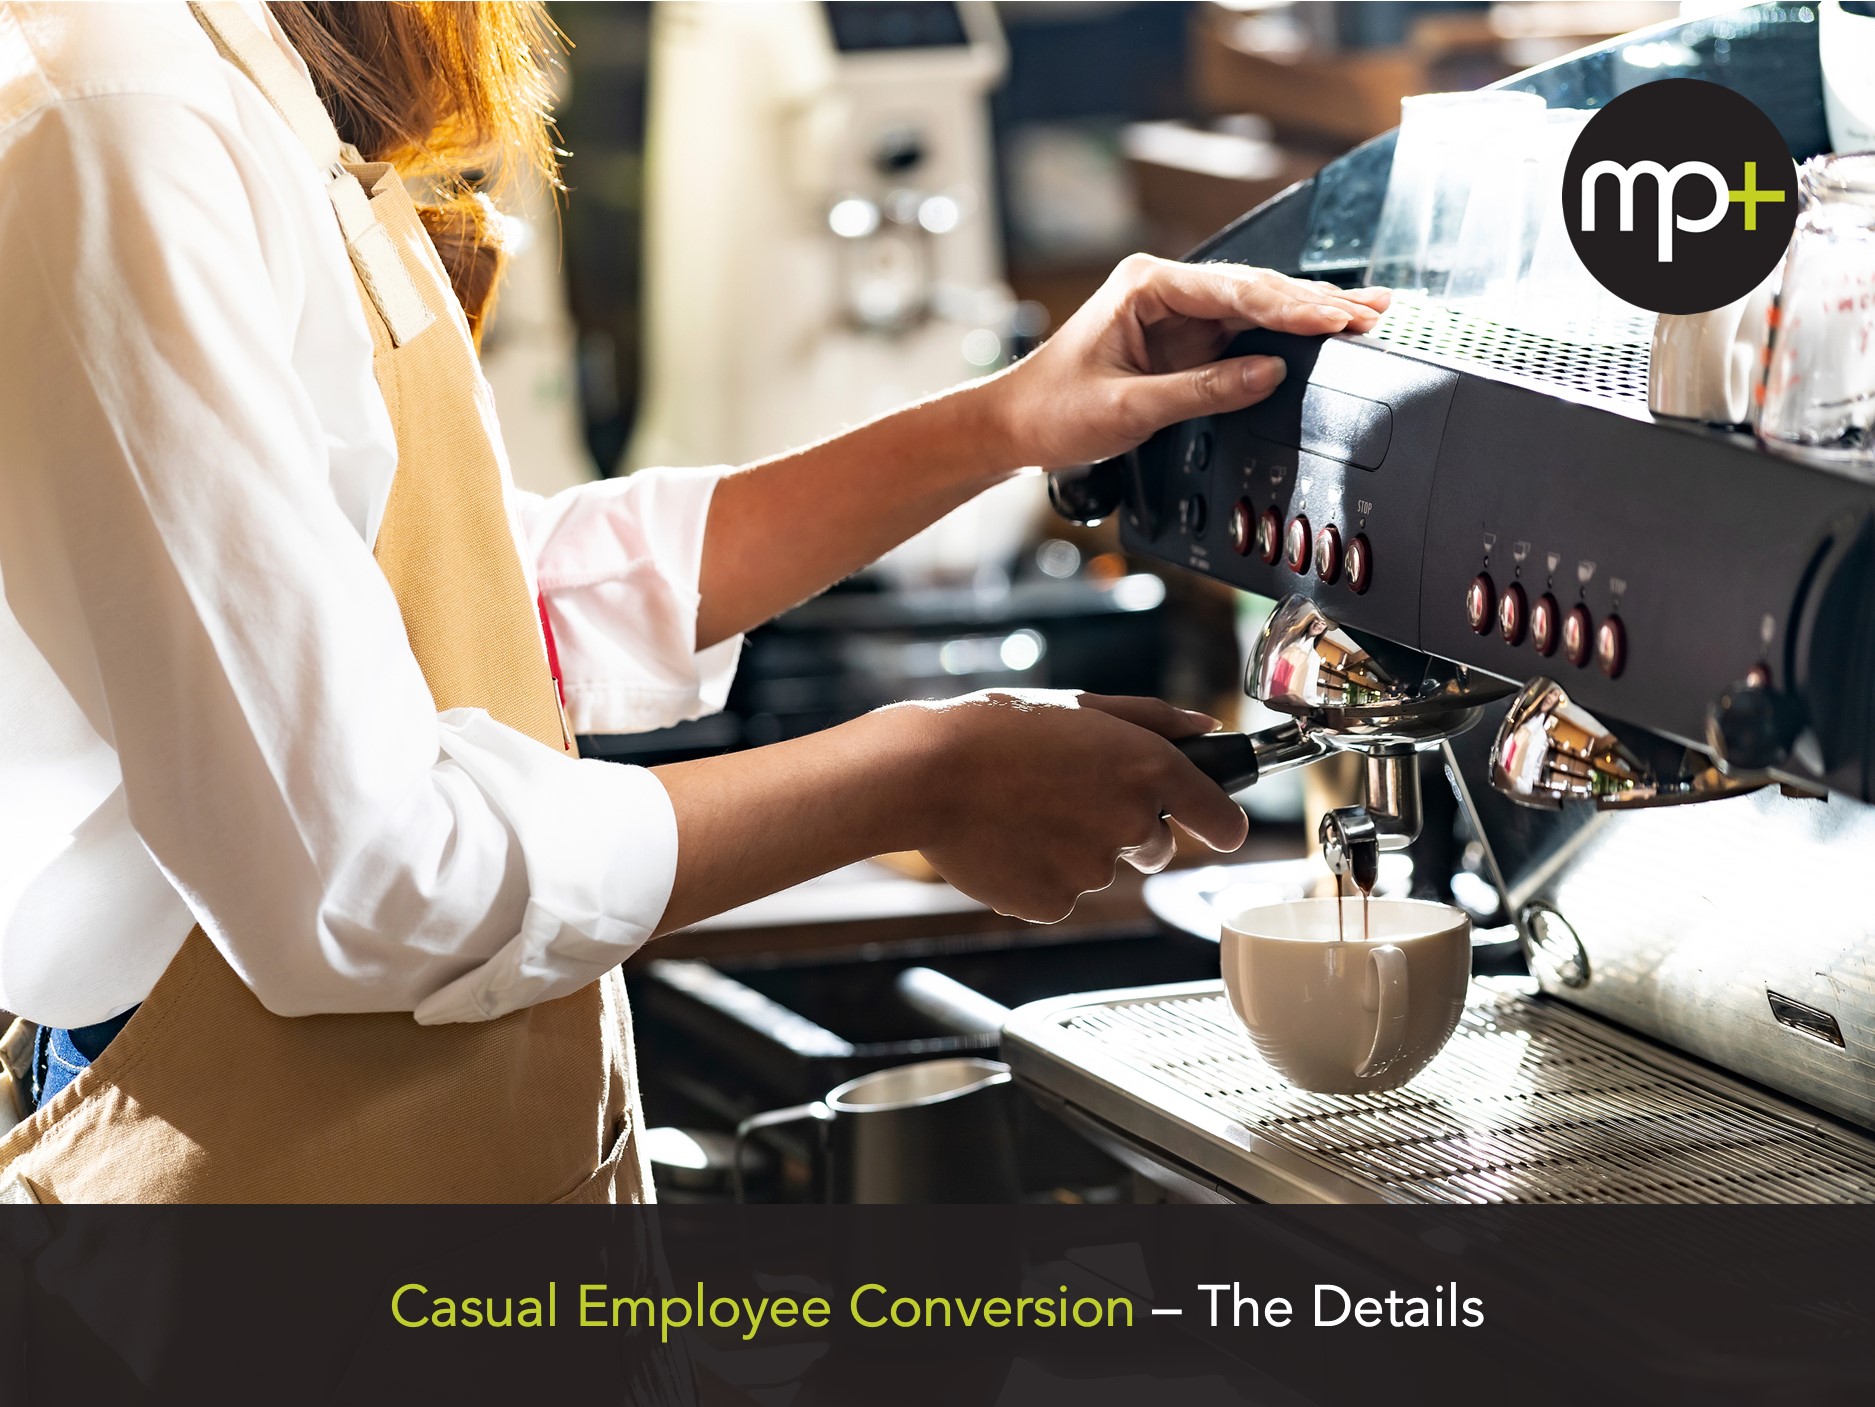 Casual Employee Conversion – The Details